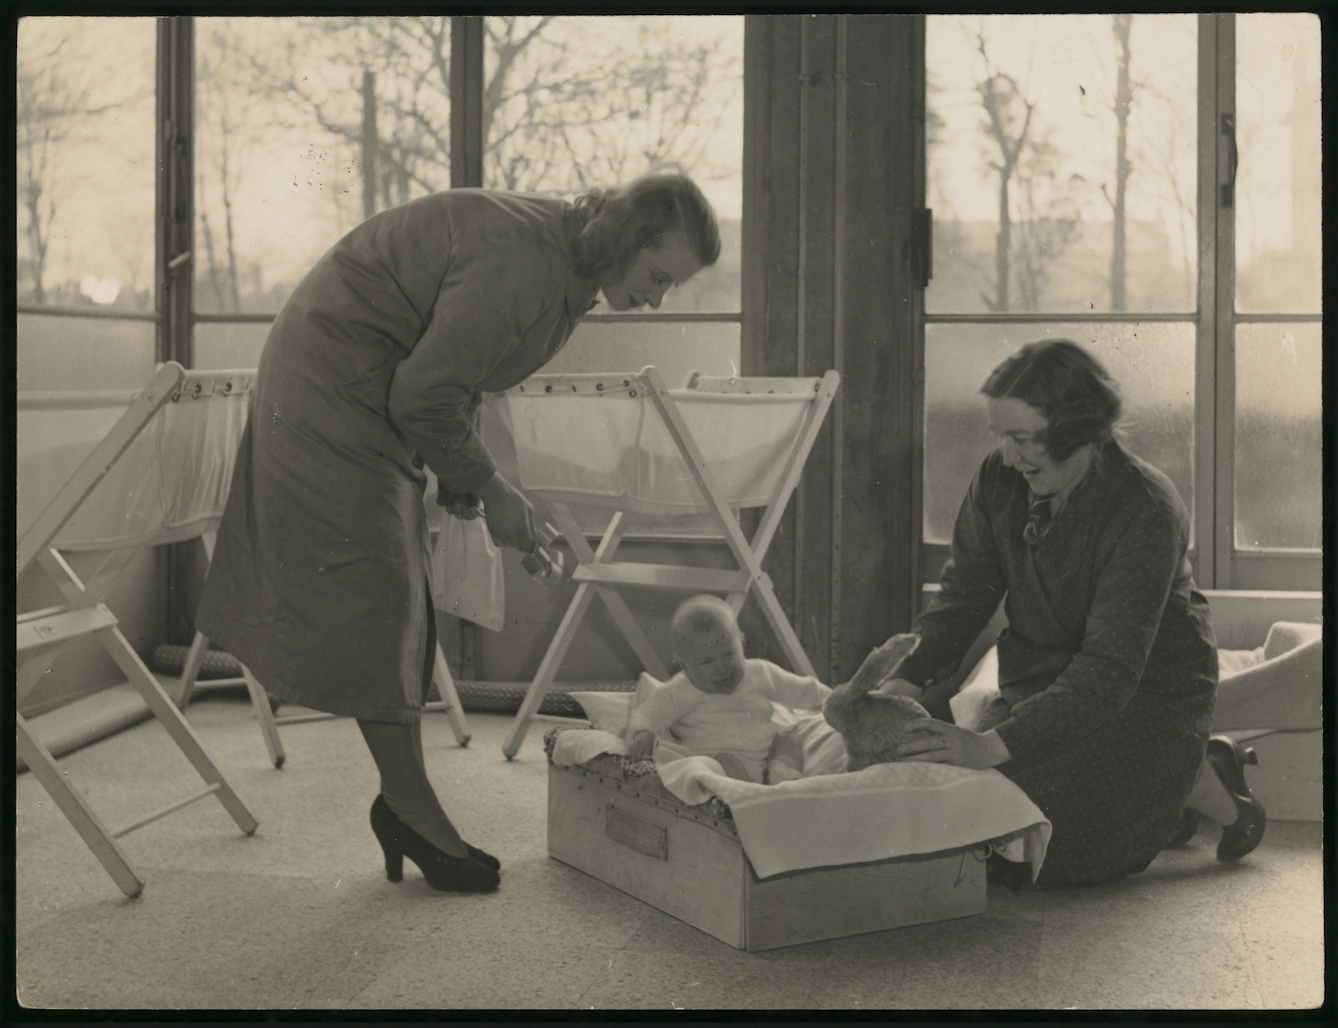 Black and white photograph showing two women attending a baby in a cot.